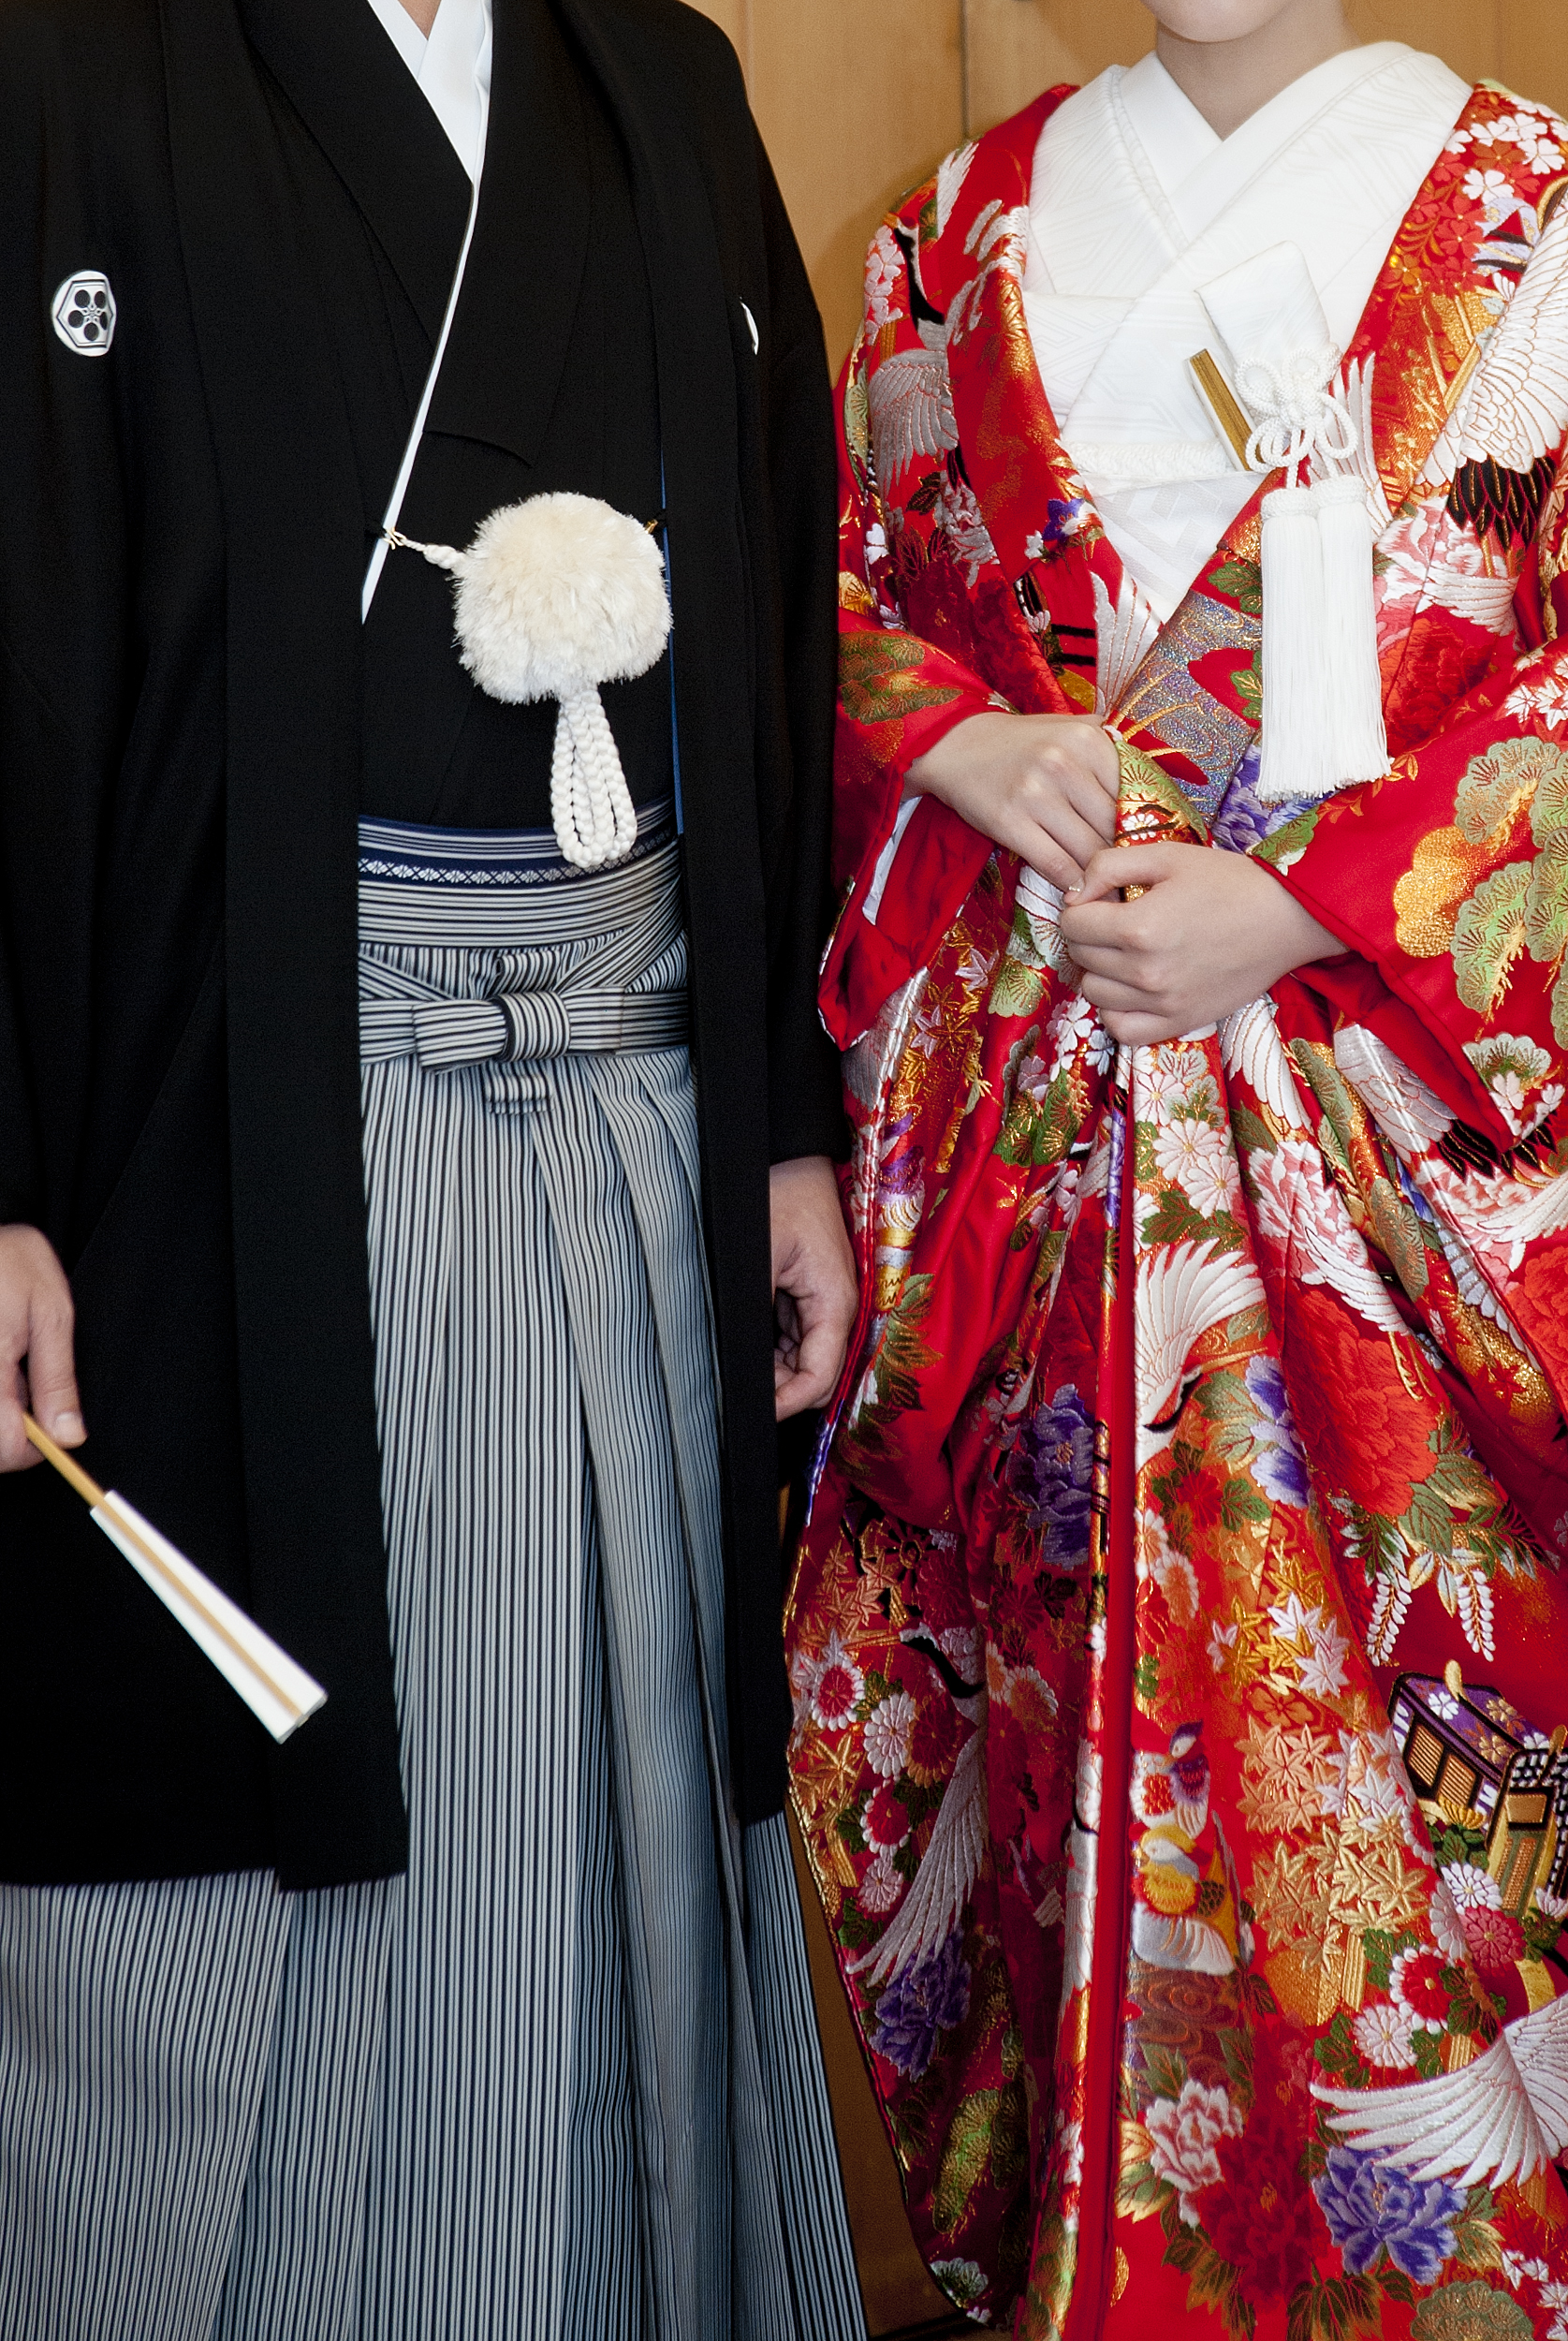 Difference between men's and women's kimono